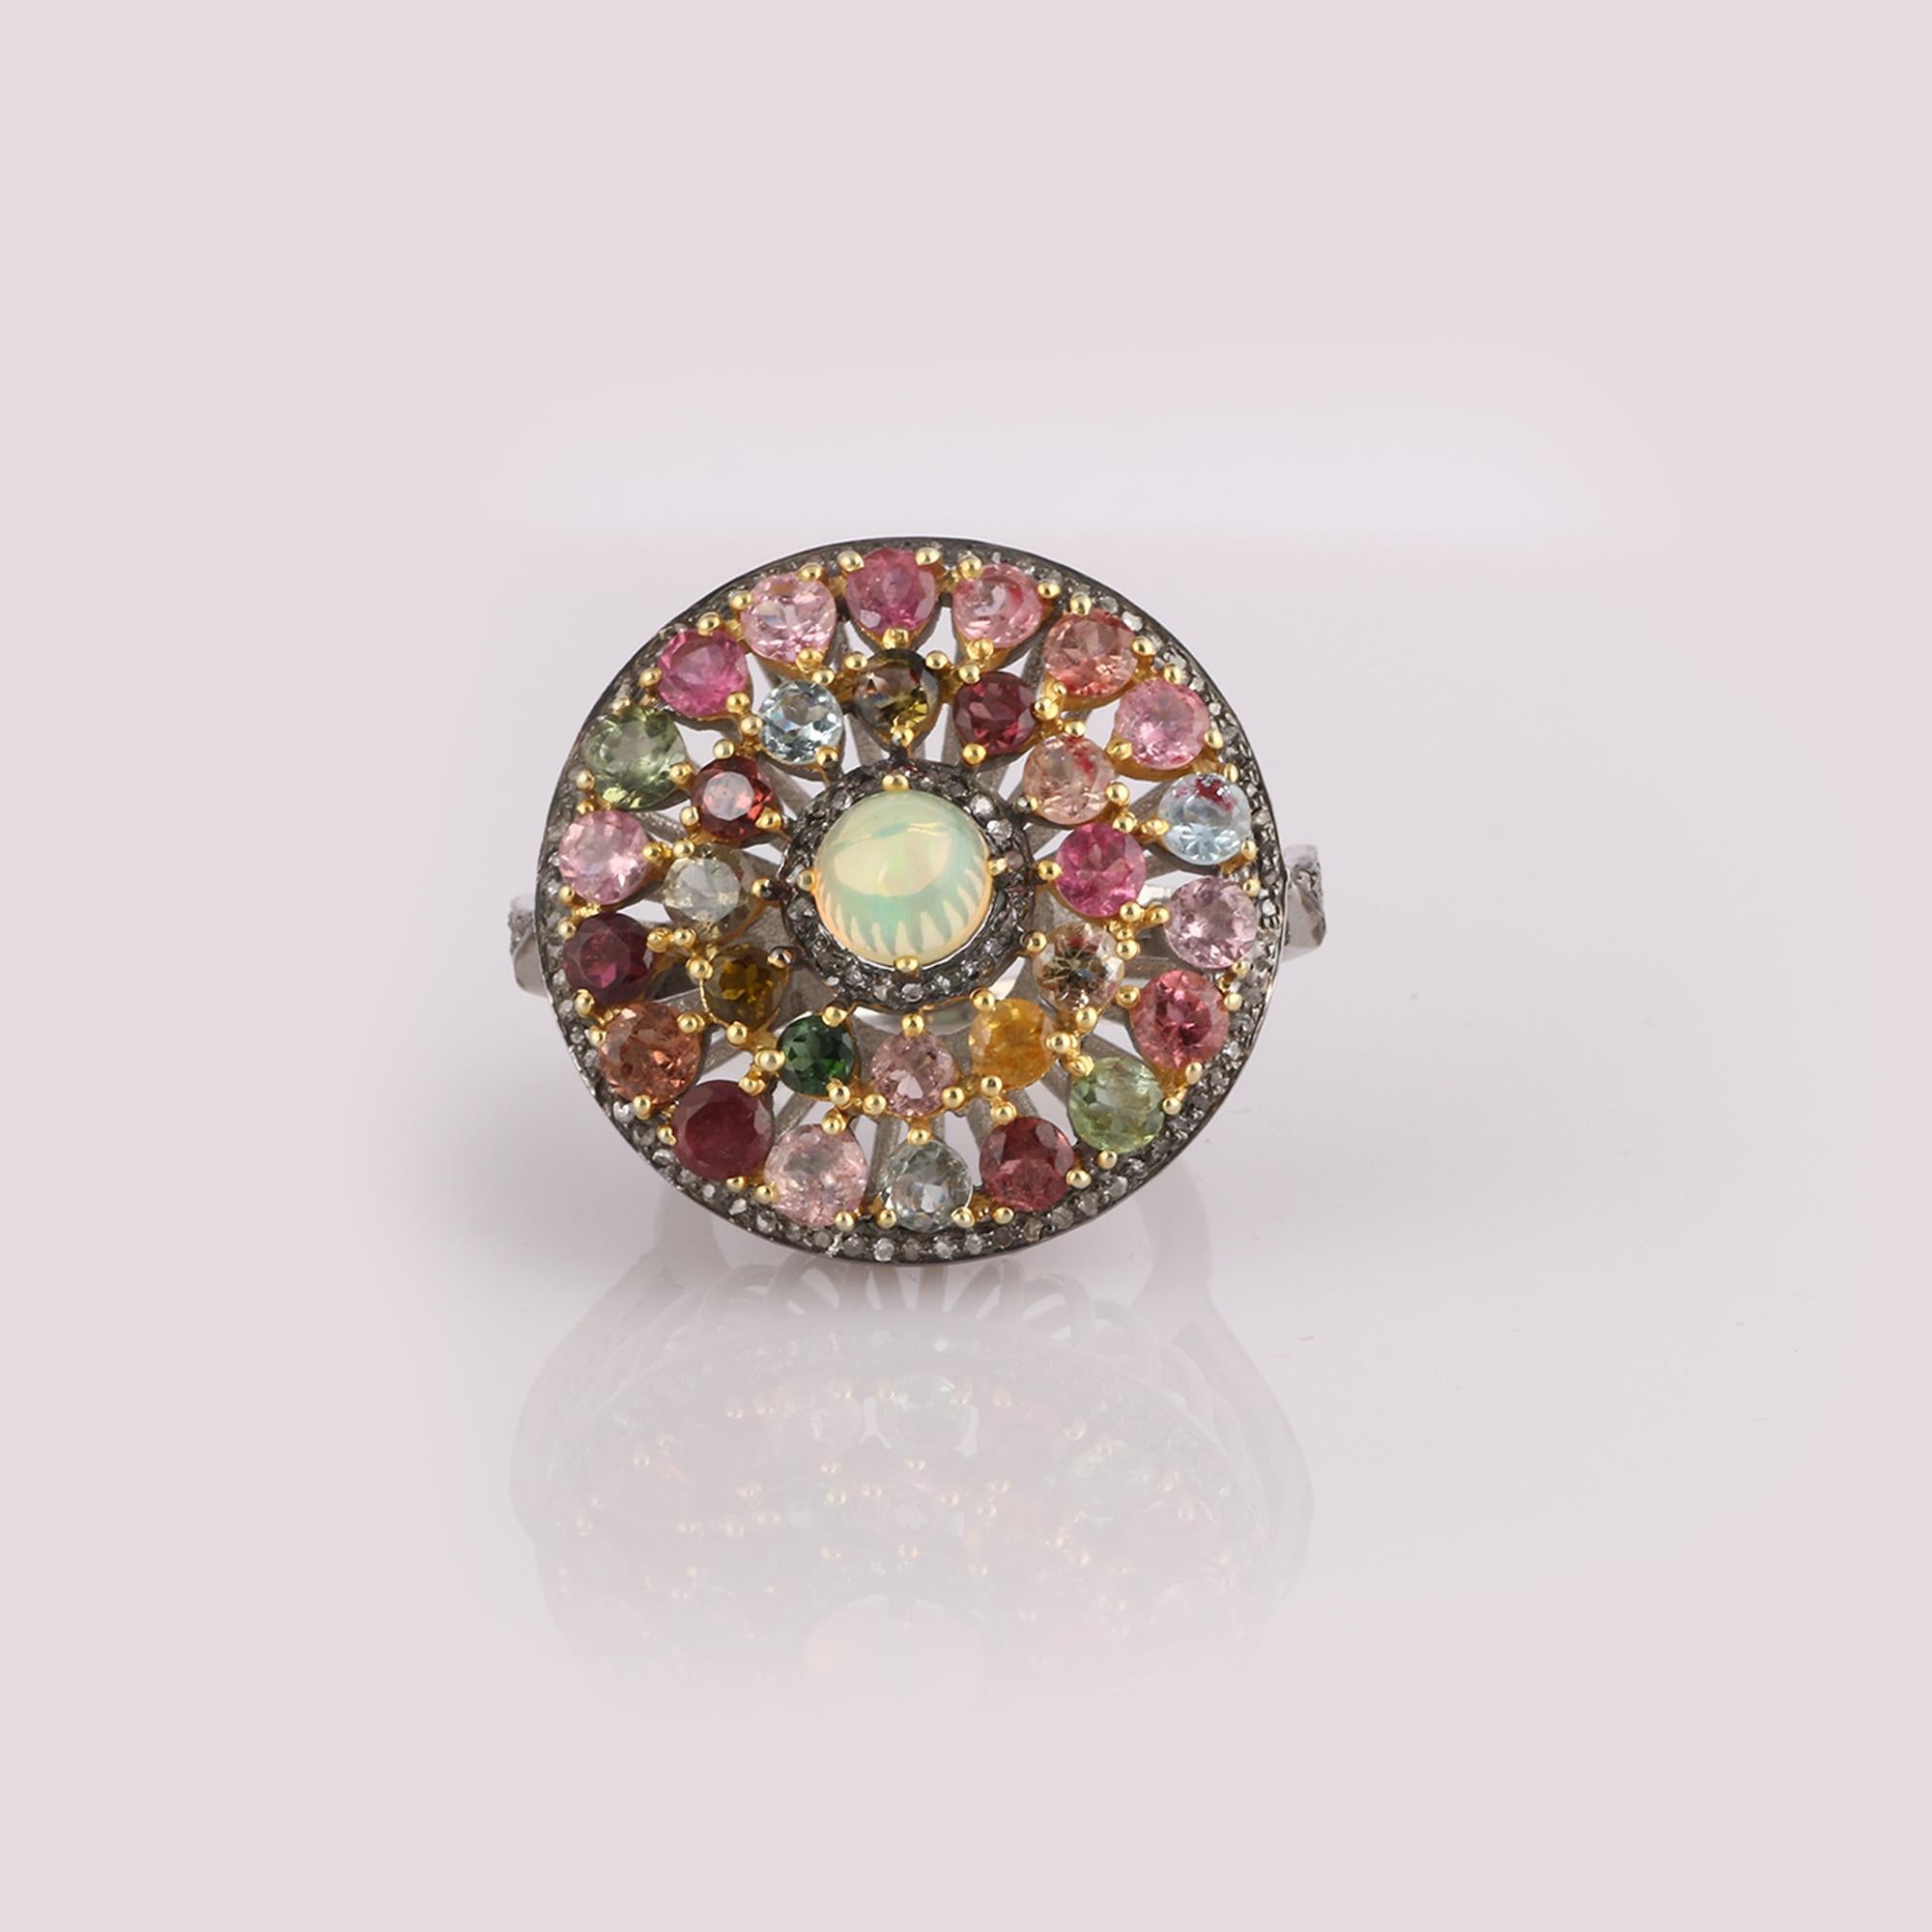 Item details:-

✦ SKU:- ESRG00221

✦ Material :- 925 Sterling Silver
✦ Gemstone Specification:-
✧ Diamond
✧ Ethiopian Opal, Multi Tourmaline

✦ Approx. Diamond Weight : 0.35
✦ Approx. Silver Weight : 12.54
✦ Approx. Gross Weight : 13.78

Ring Size